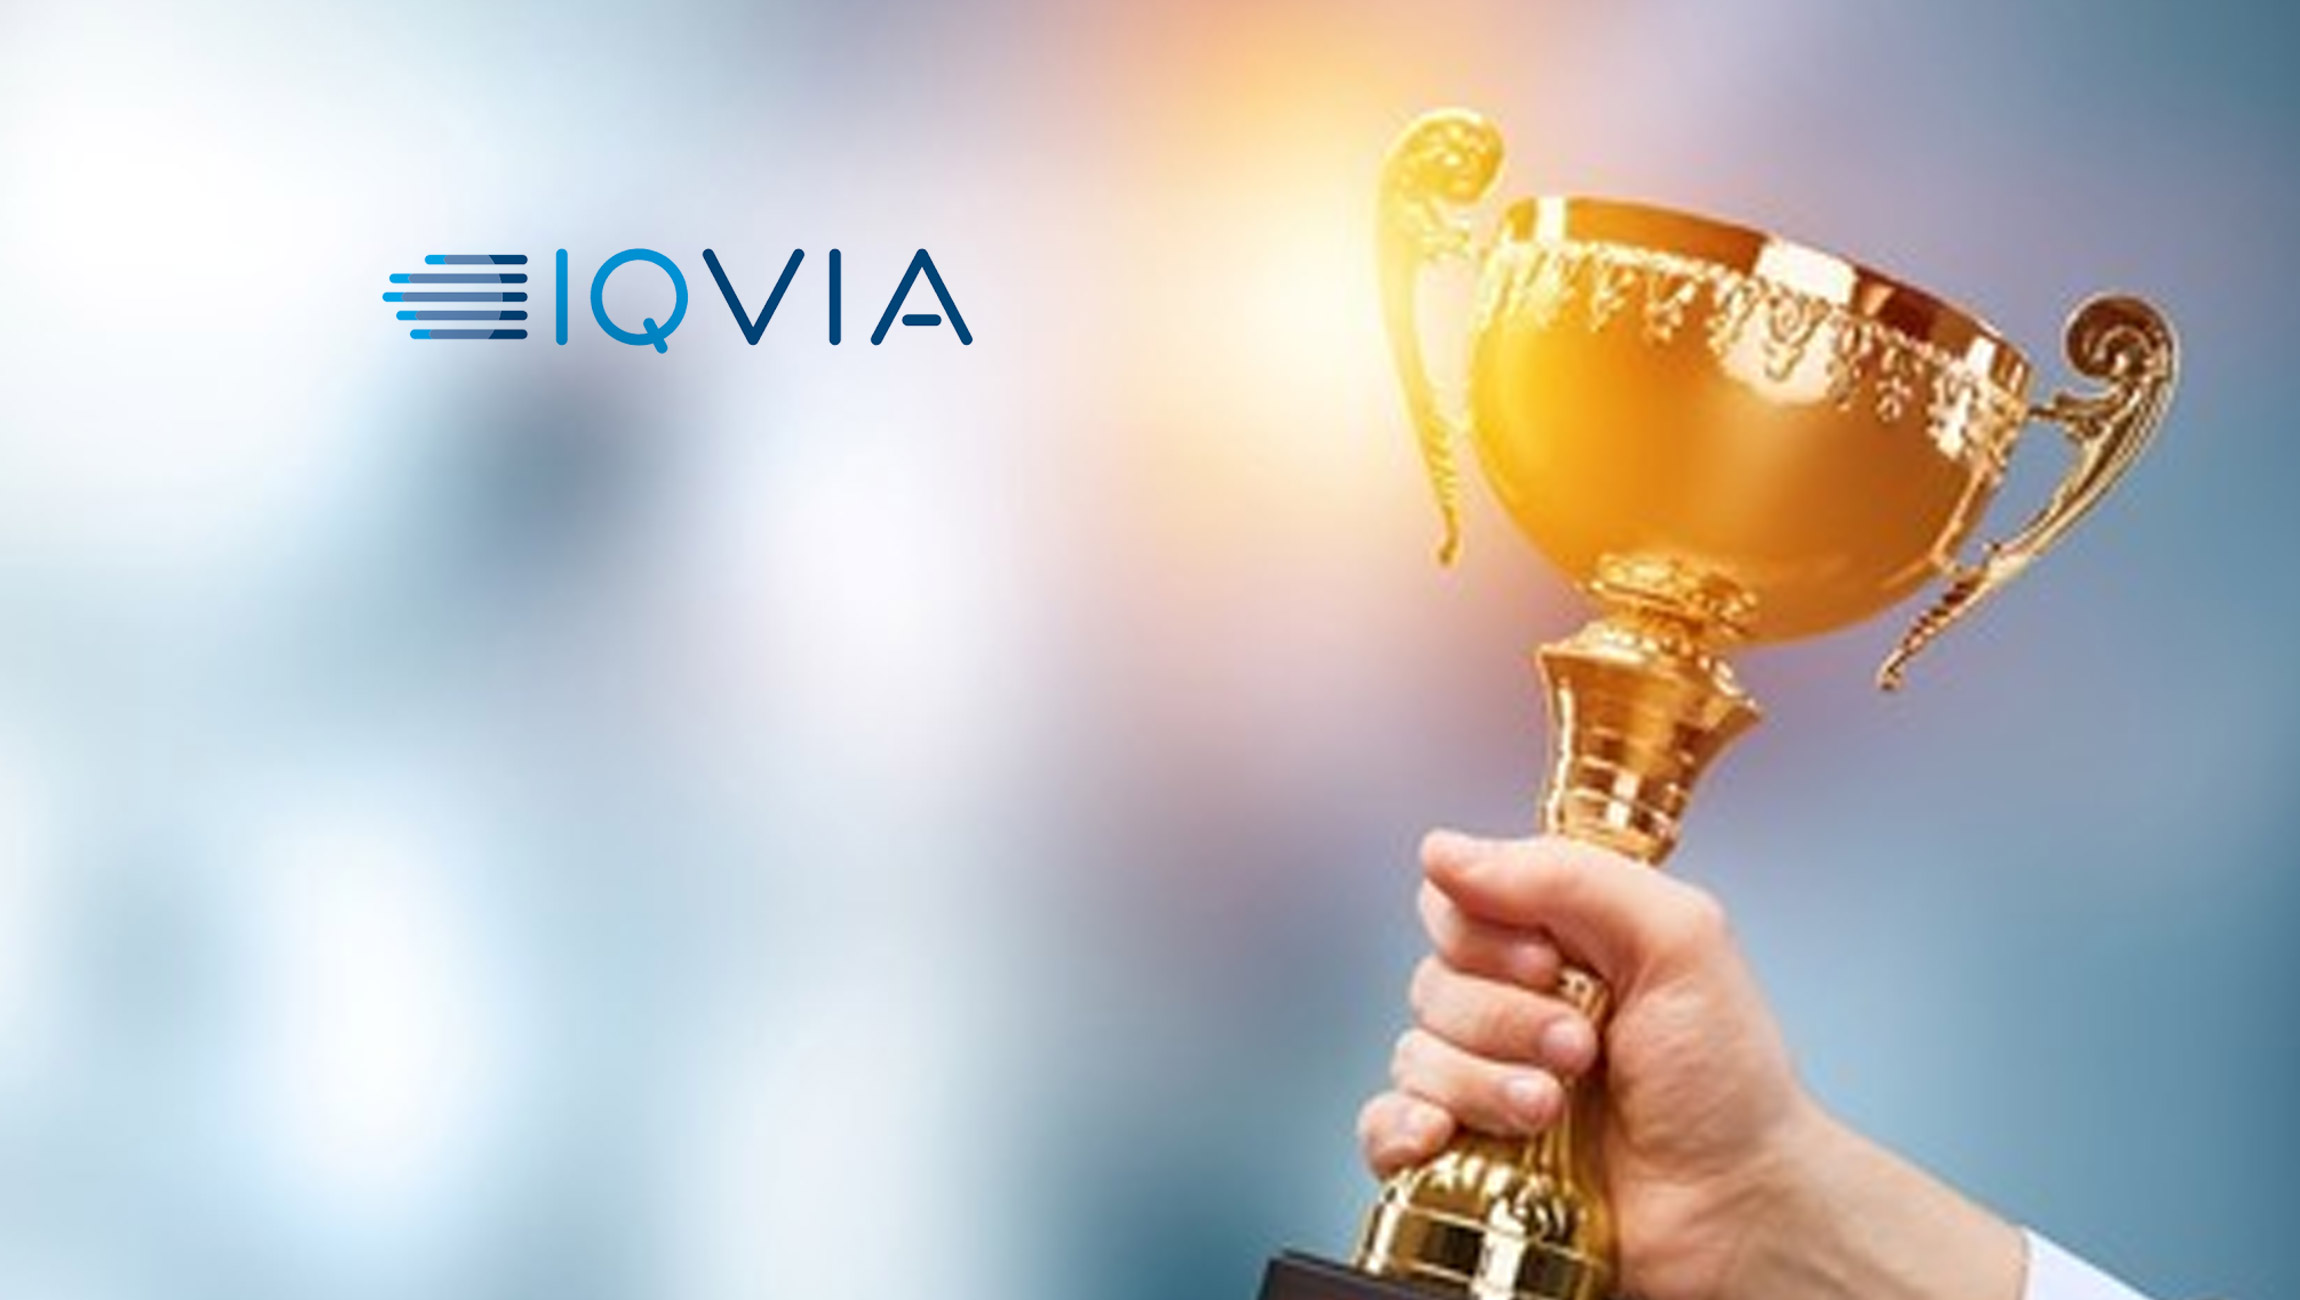 IQVIA Wins Snowflake’s “Marketplace Healthcare and Life Sciences Partner of the Year” Award